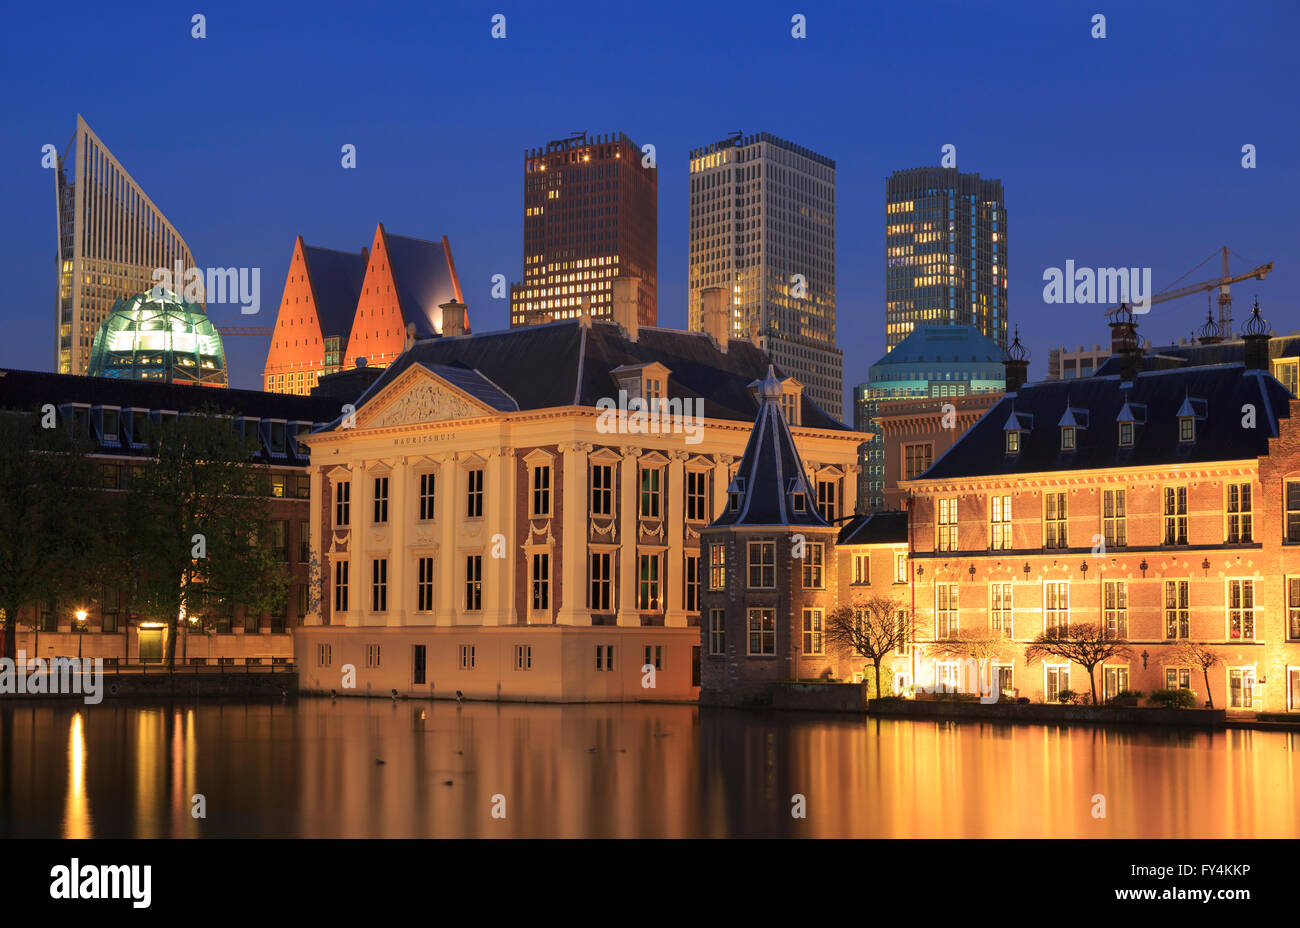 Hofvijver, Mauritshuis and Binnenhof Palace - Dutch Parlament in the Hague (Den Haag), the Netherlands. Stock Photo